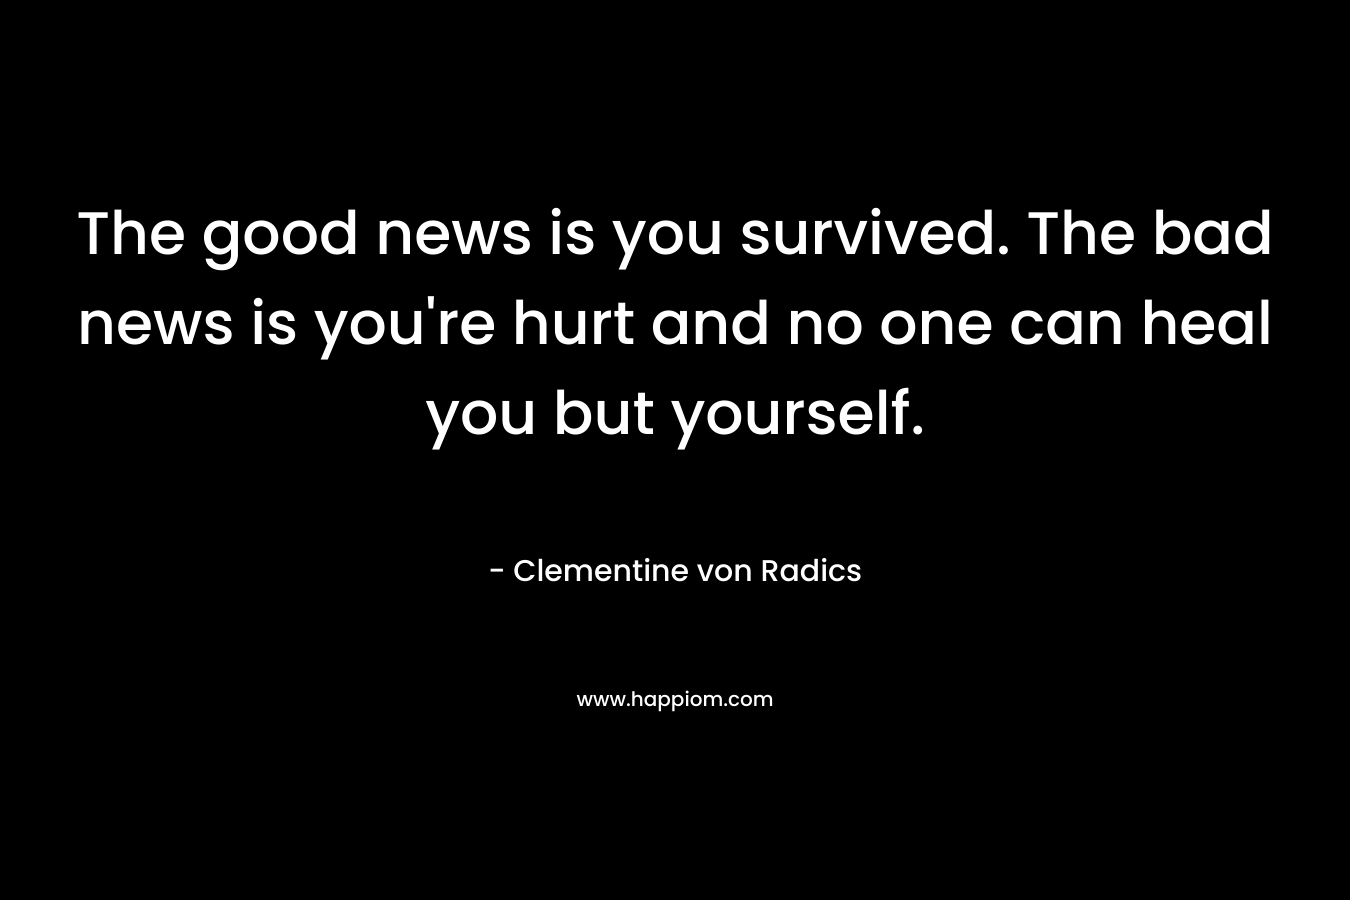 The good news is you survived. The bad news is you're hurt and no one can heal you but yourself.